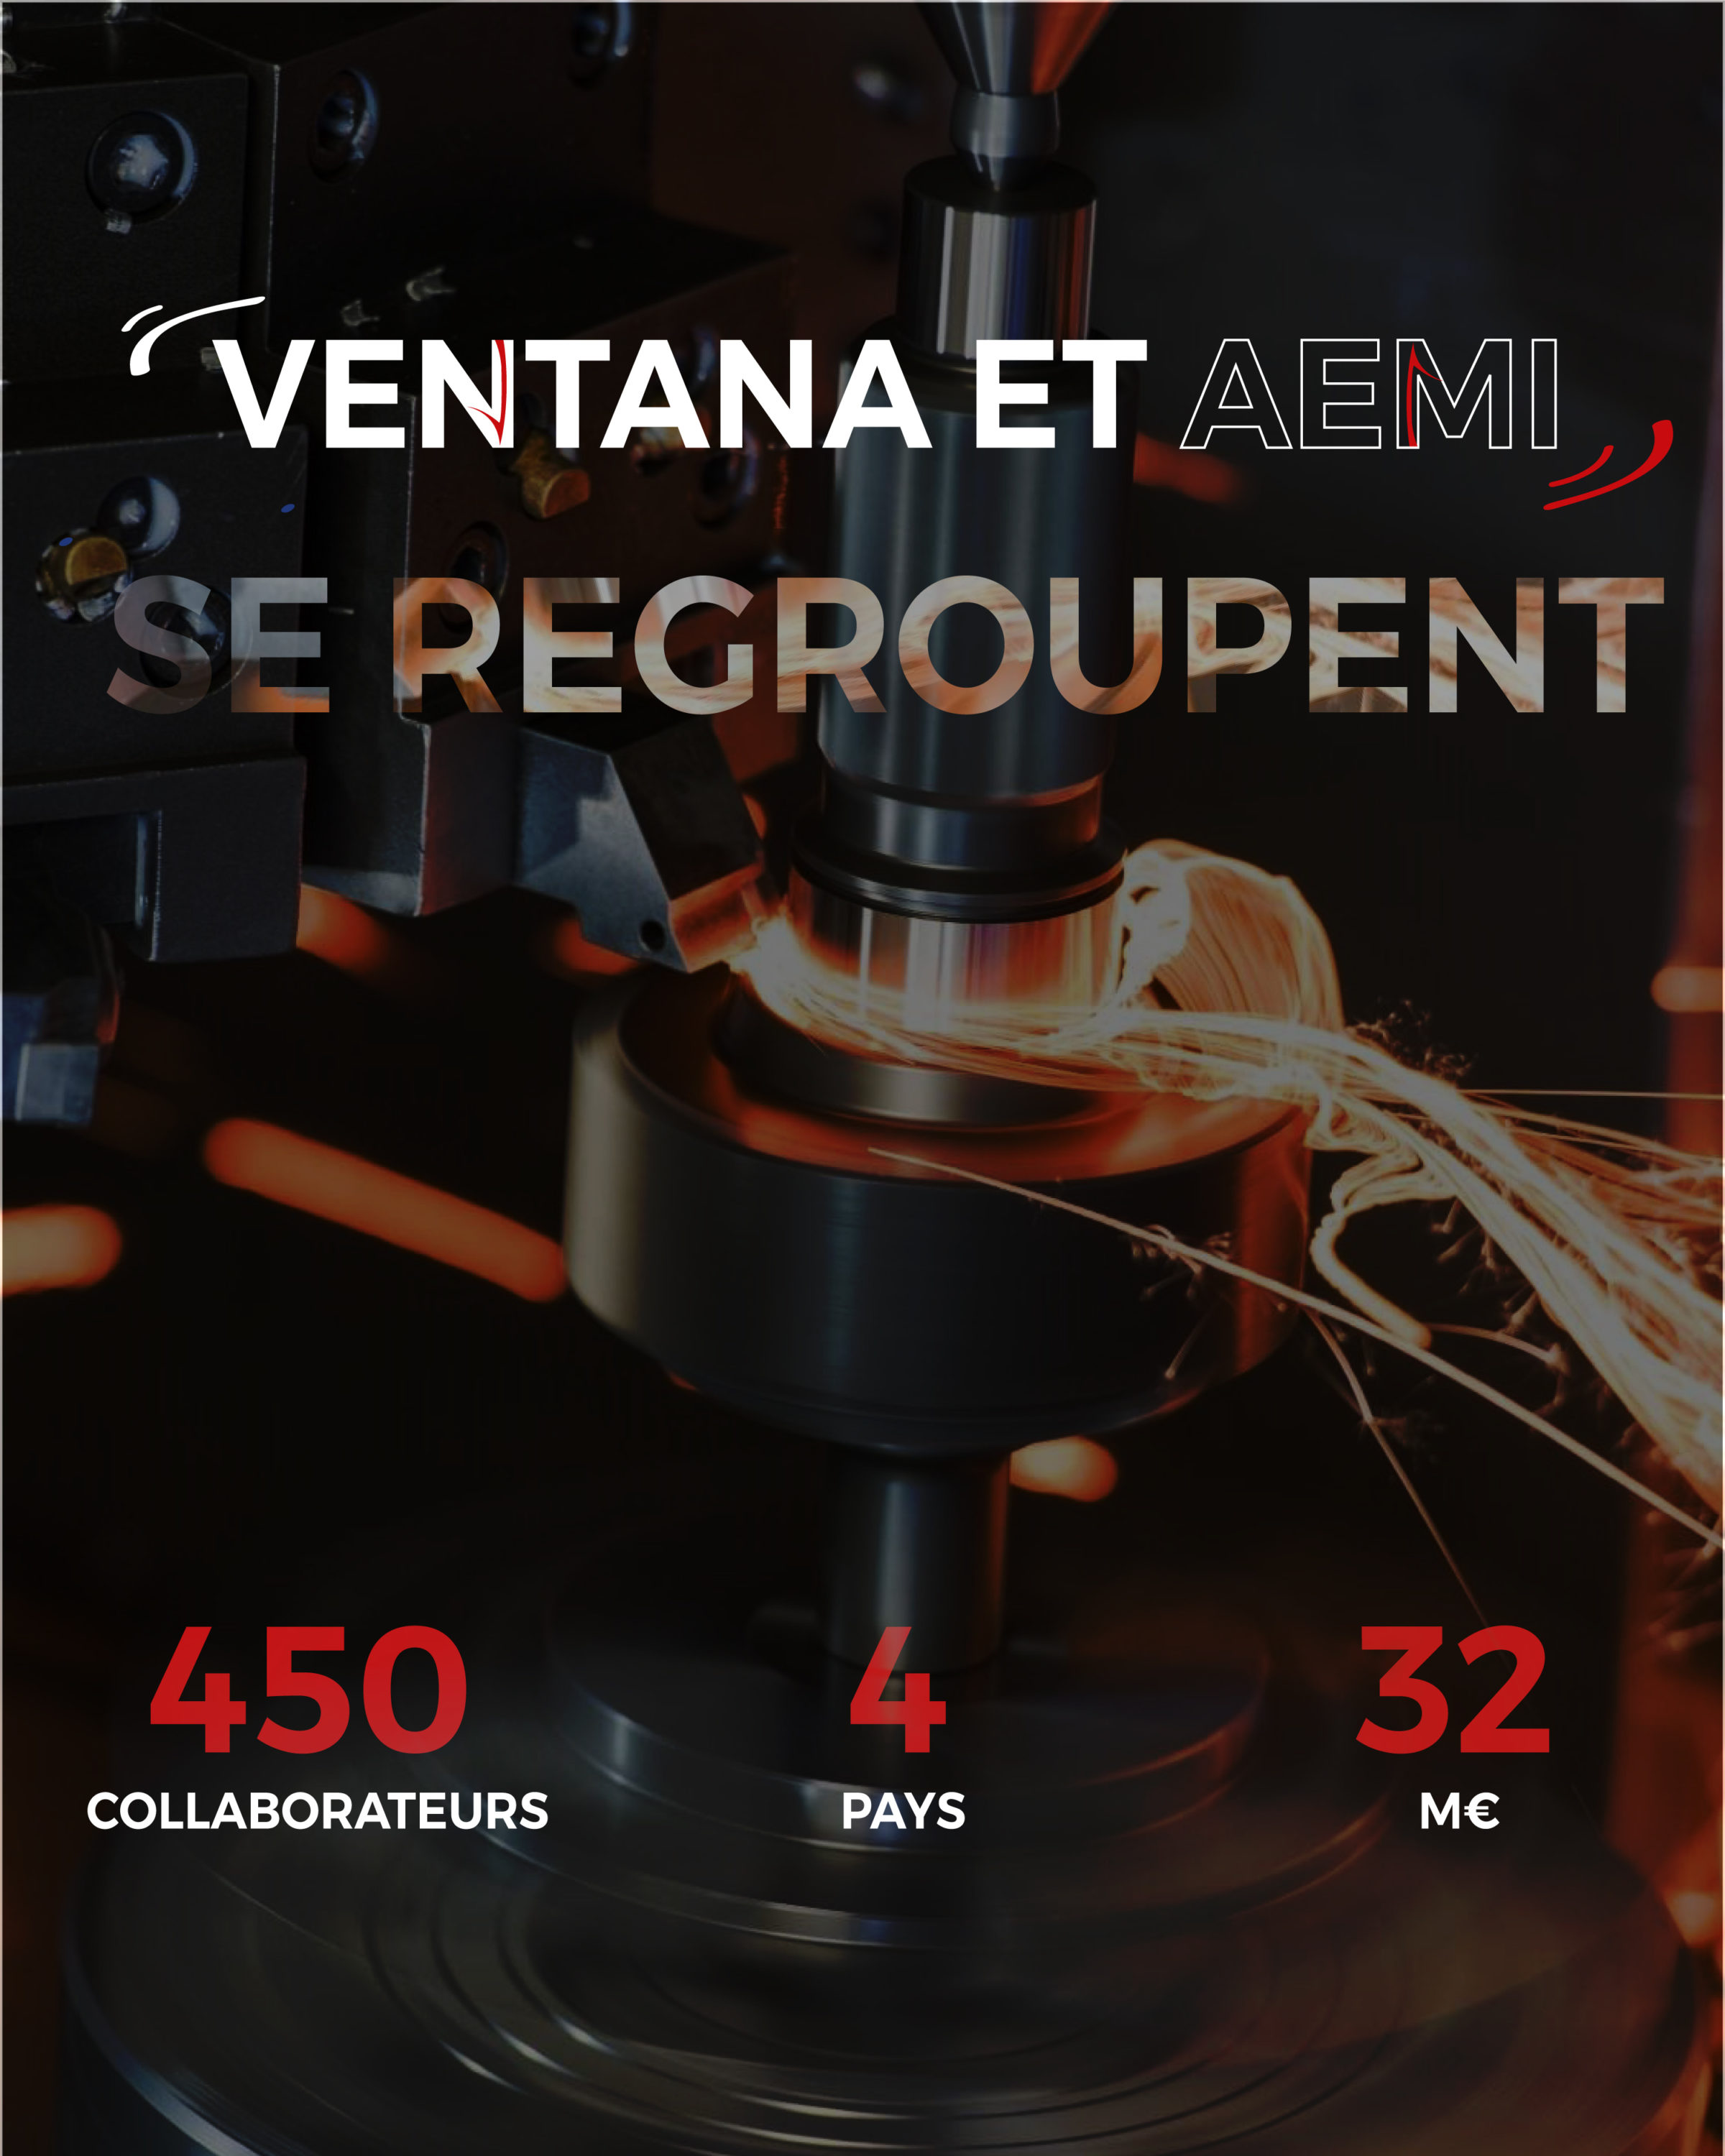 VENTANA ideally complements its offer by acquiring the AEMI Group